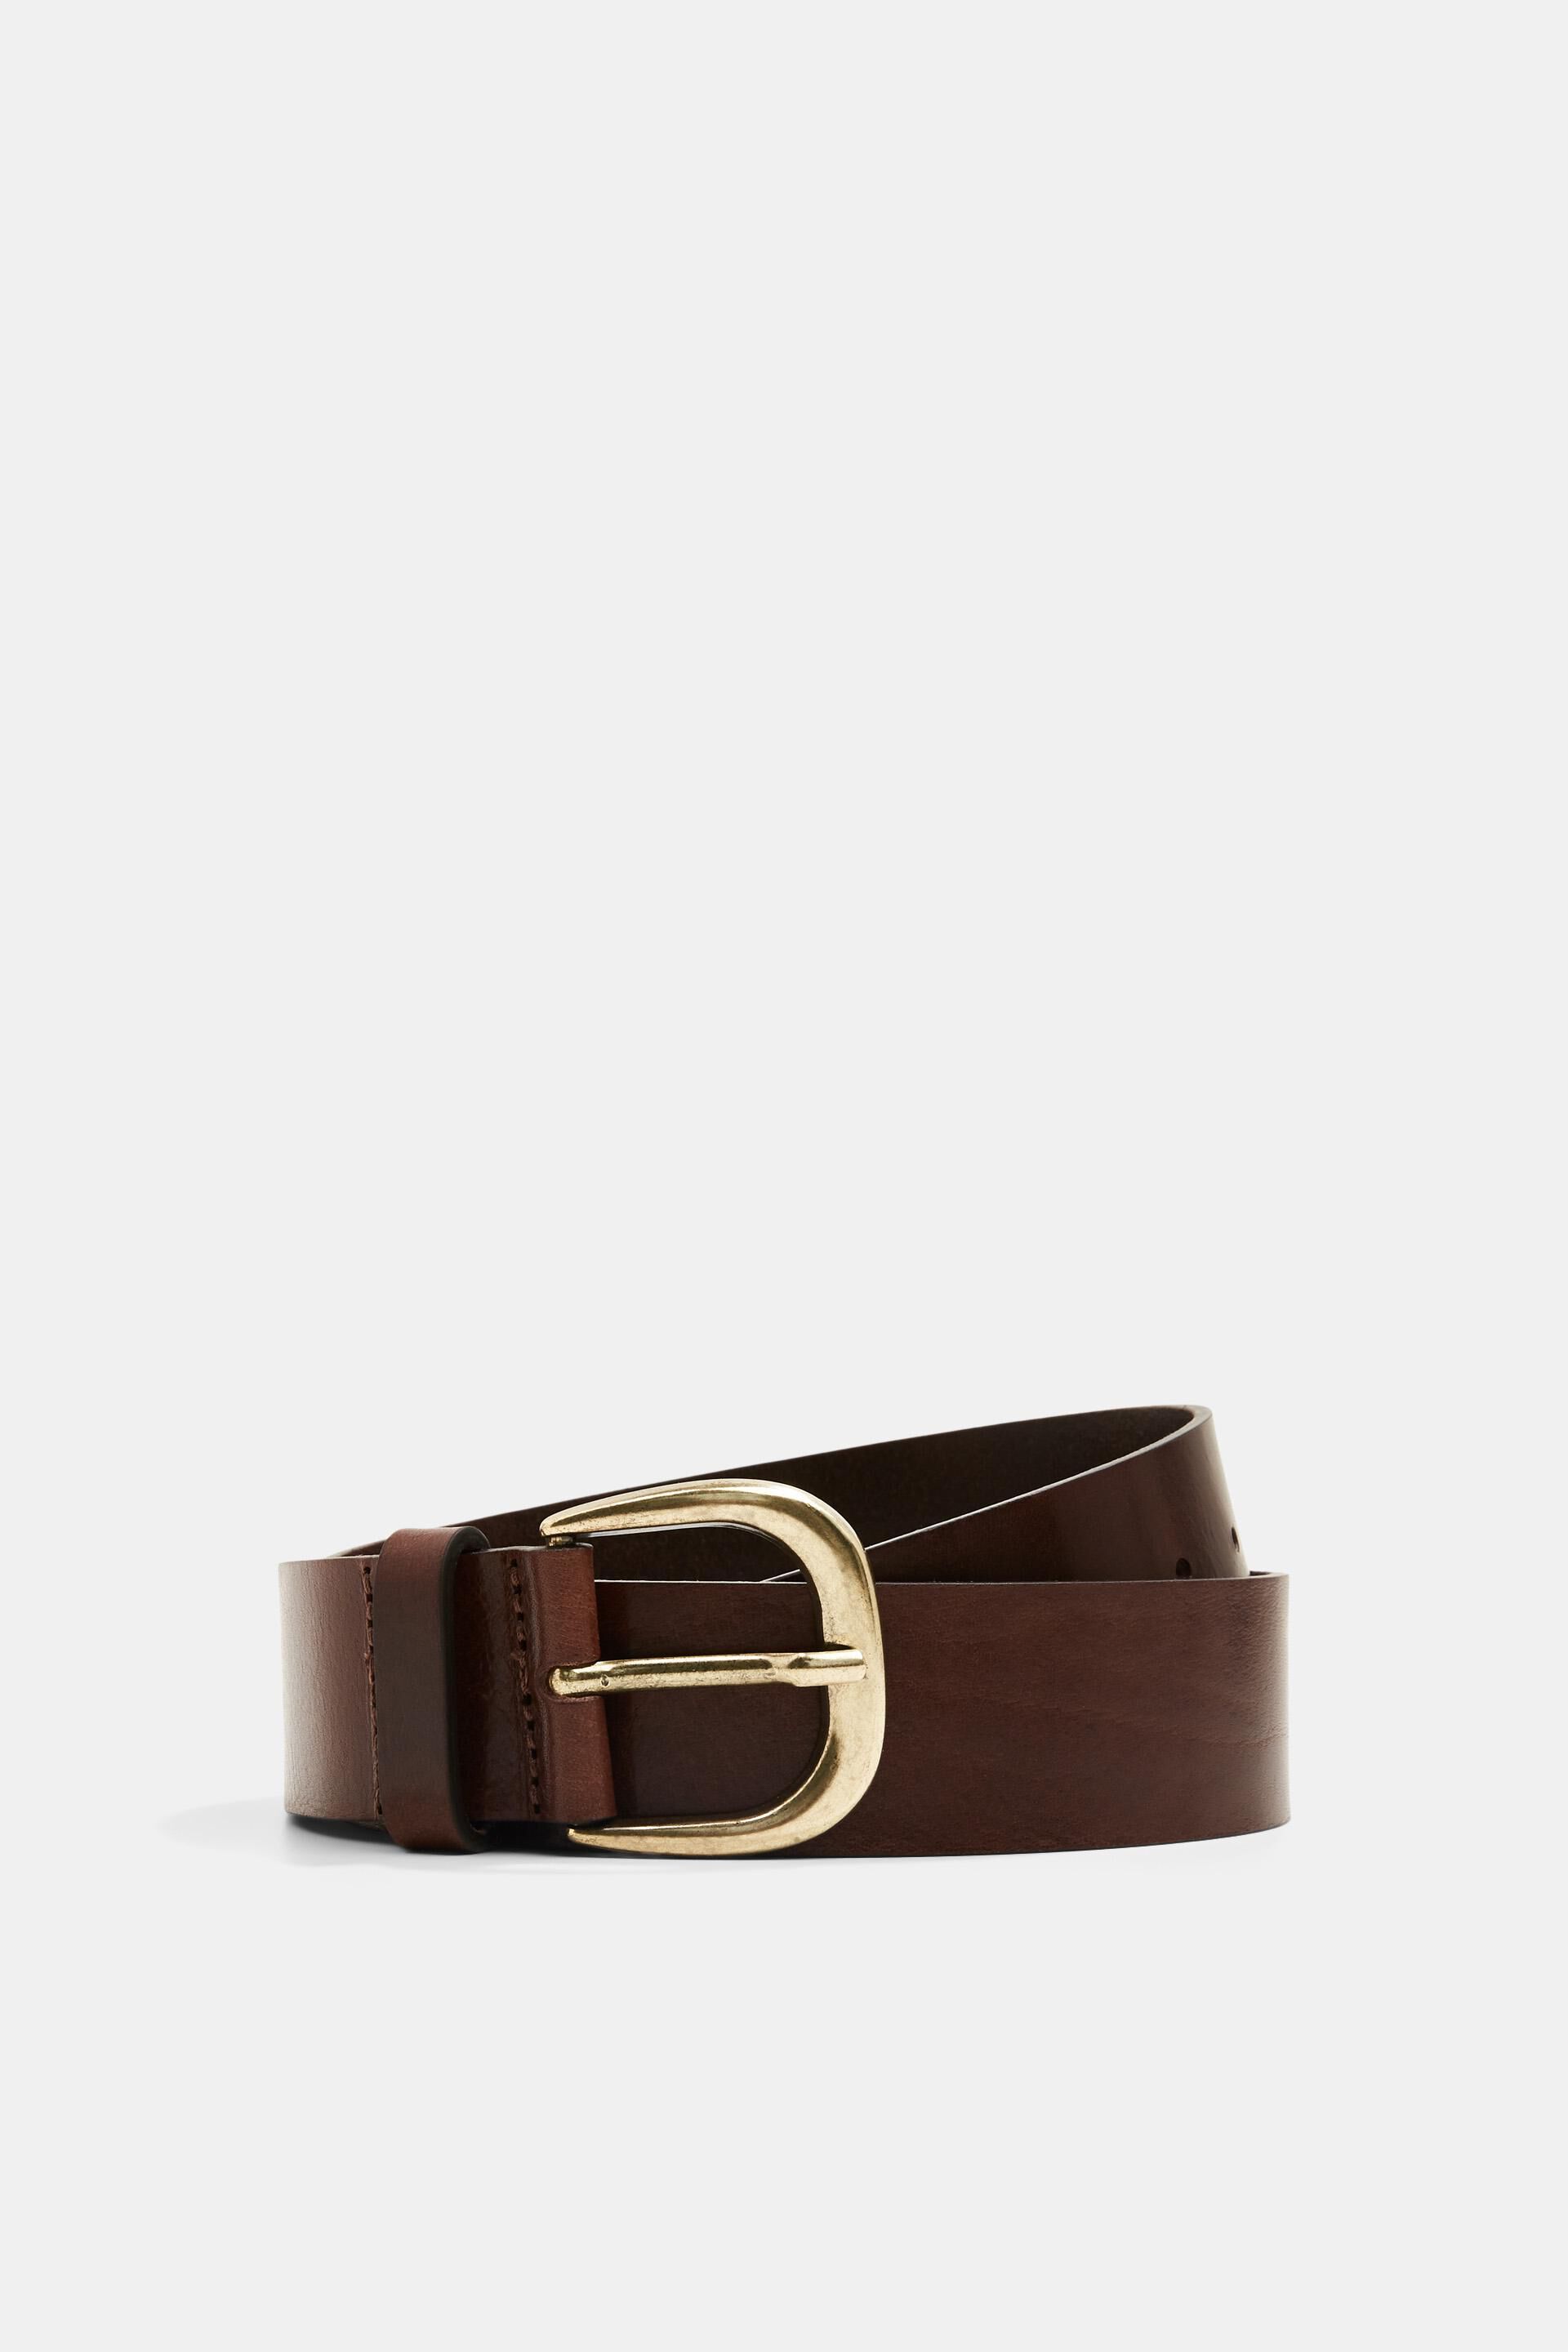 Esprit pin belt with Leather buckle